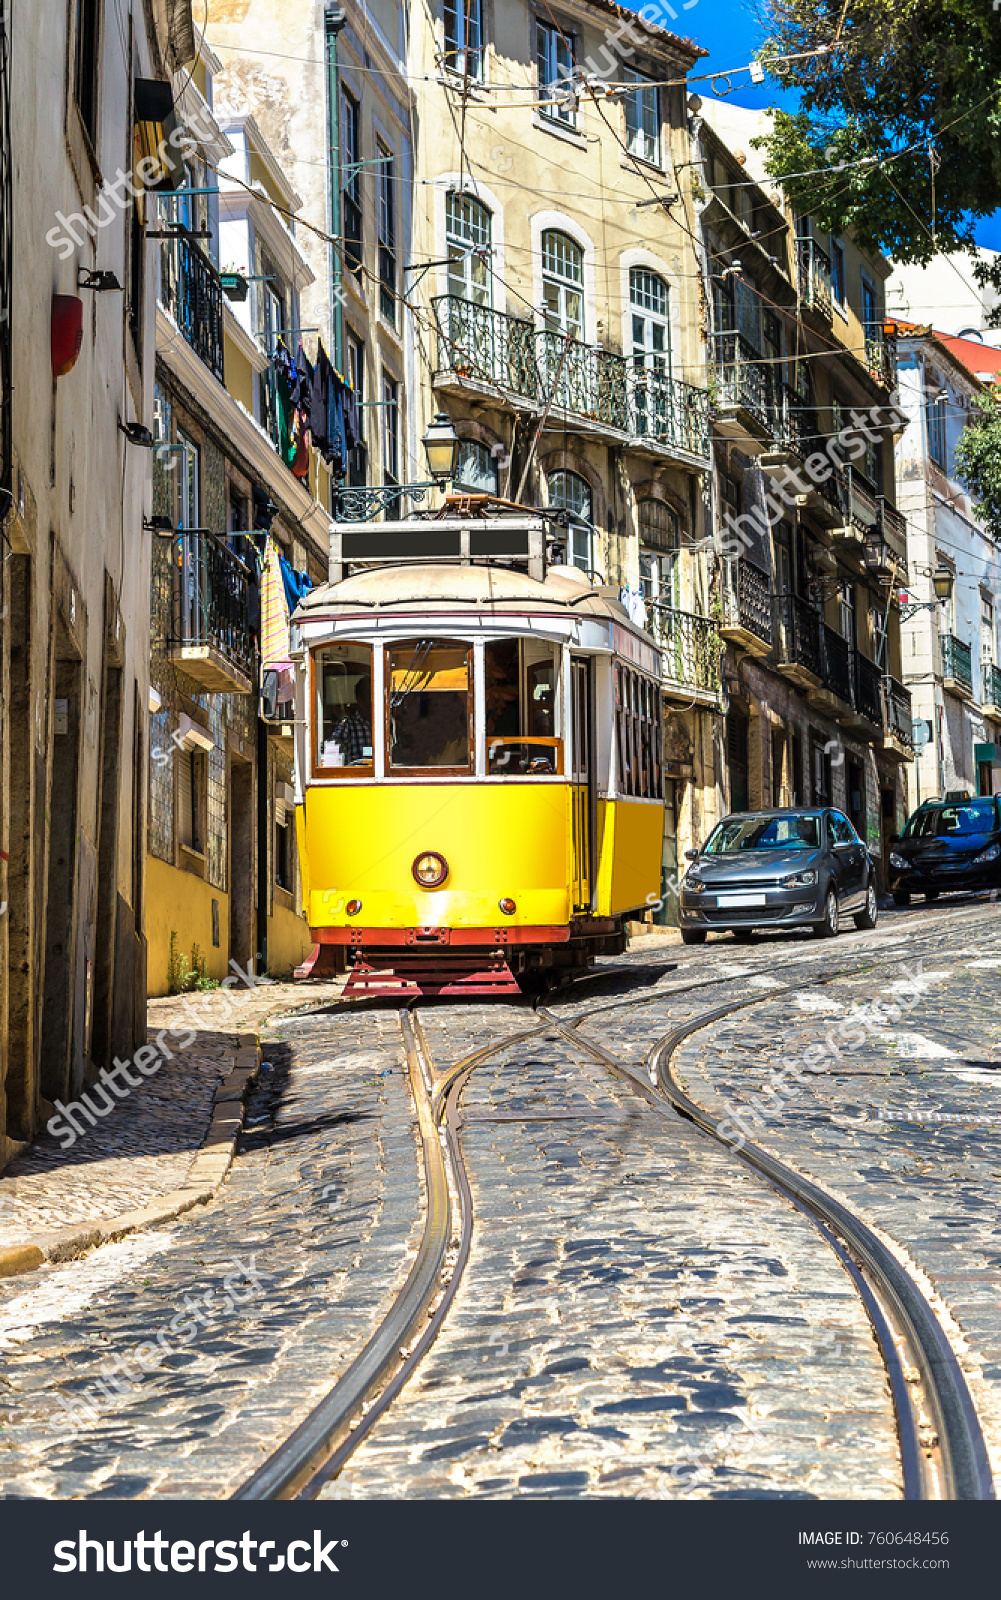 Vintage tram in the city center of Lisbon, Portugal in a summer day #760648456